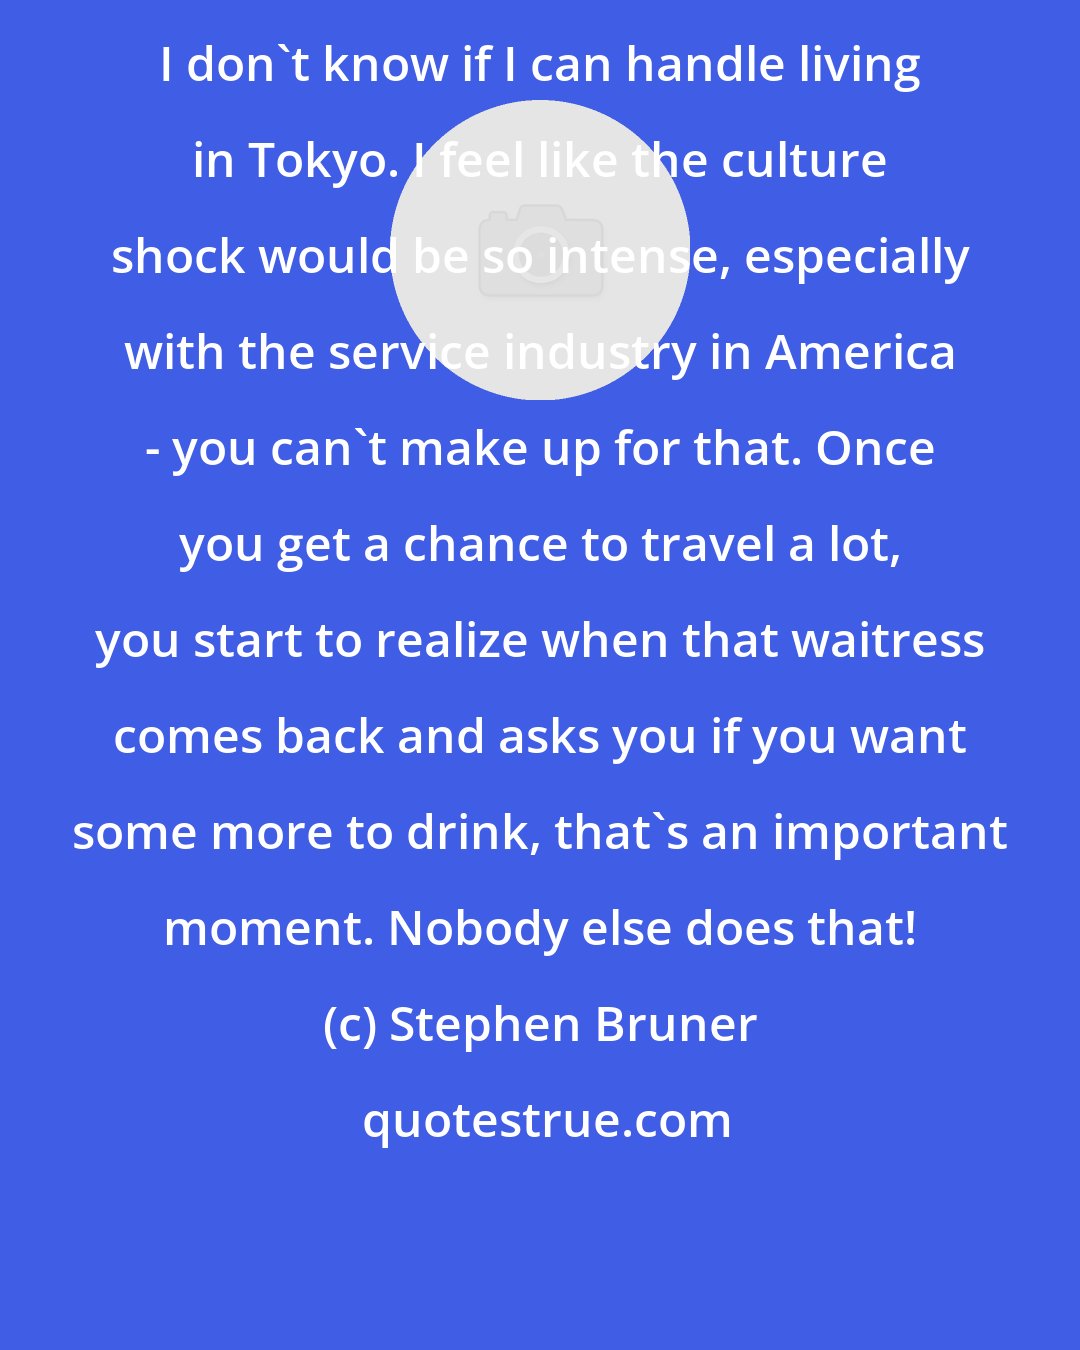 Stephen Bruner: I don't know if I can handle living in Tokyo. I feel like the culture shock would be so intense, especially with the service industry in America - you can't make up for that. Once you get a chance to travel a lot, you start to realize when that waitress comes back and asks you if you want some more to drink, that's an important moment. Nobody else does that!